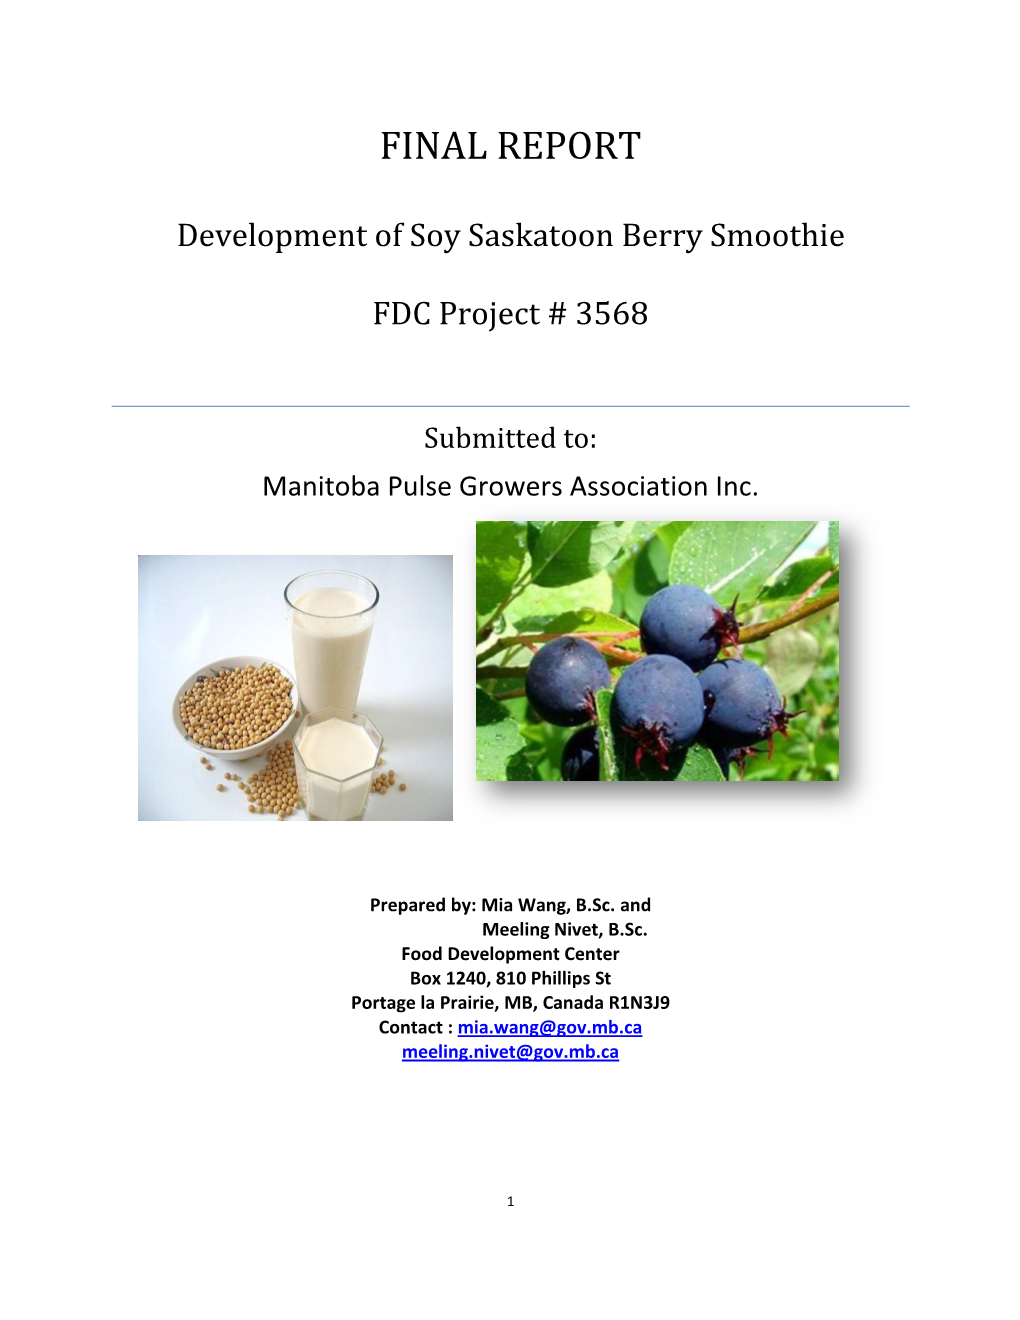 Development of Soy Saskatoon Berry Smoothie FDC Project # 3568